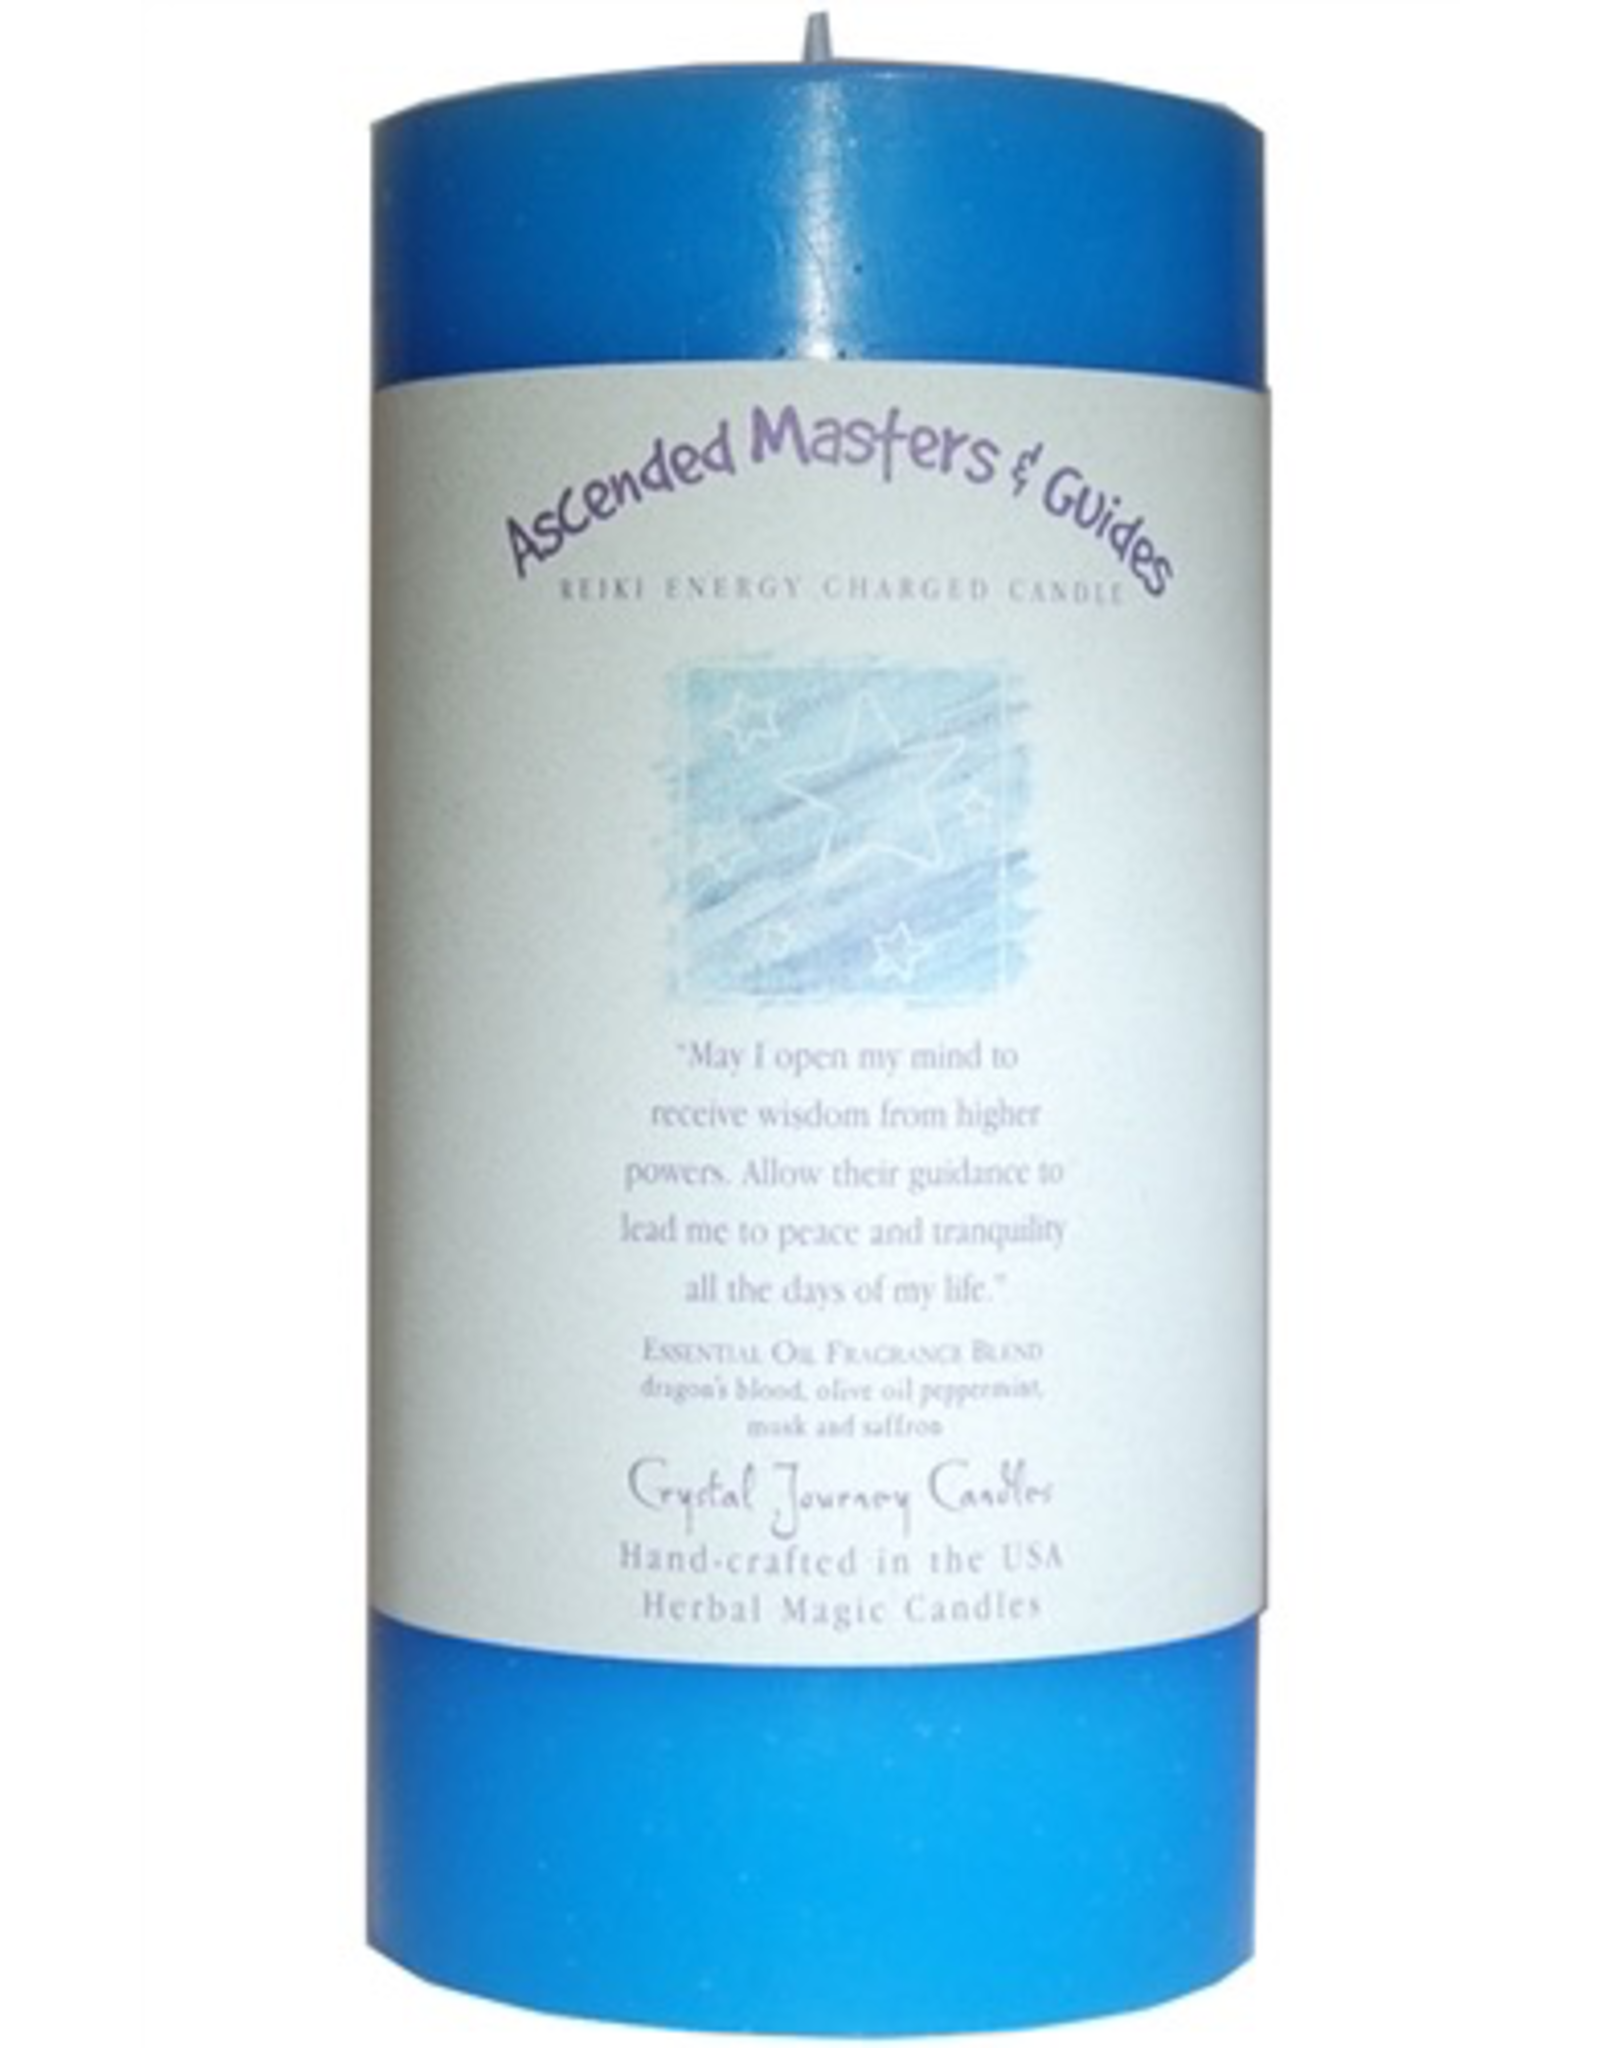 Crystal Journey Ascended Masters 3x6 Herbal Pillar Candle